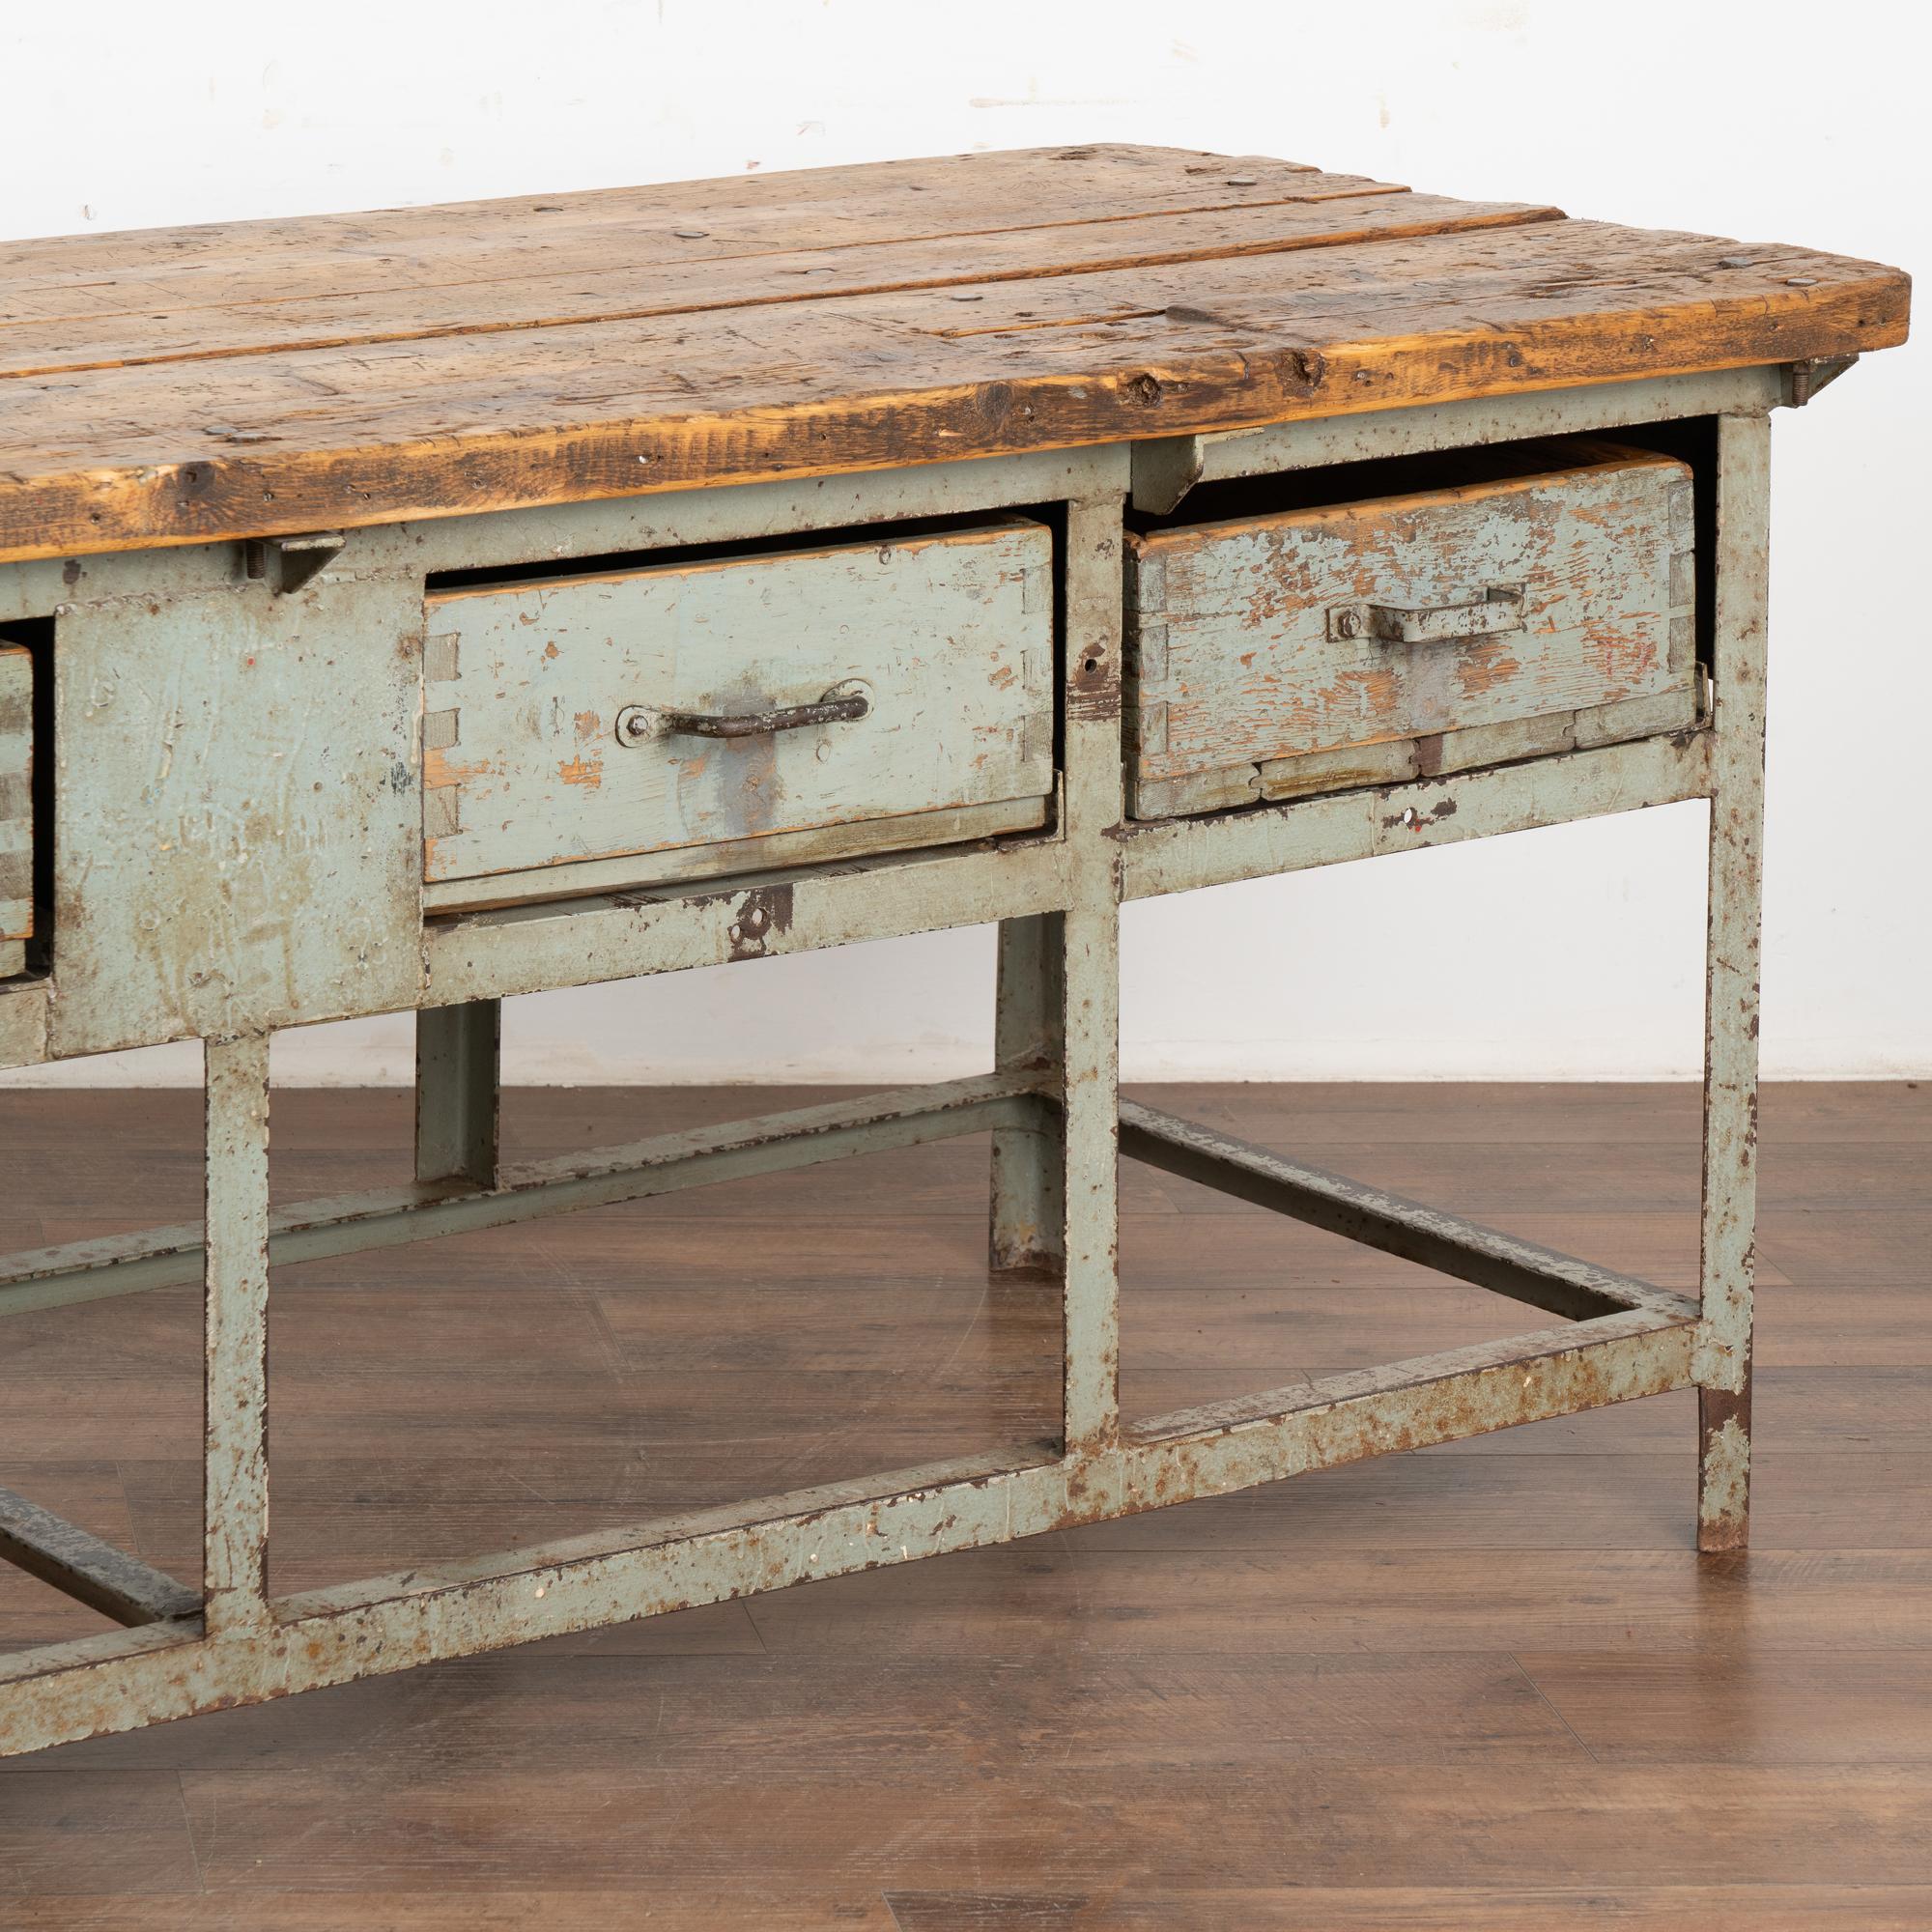 Metal Long Industrial Work Table Kitchen Island with 4 Drawers, Hungary circa 1920-40